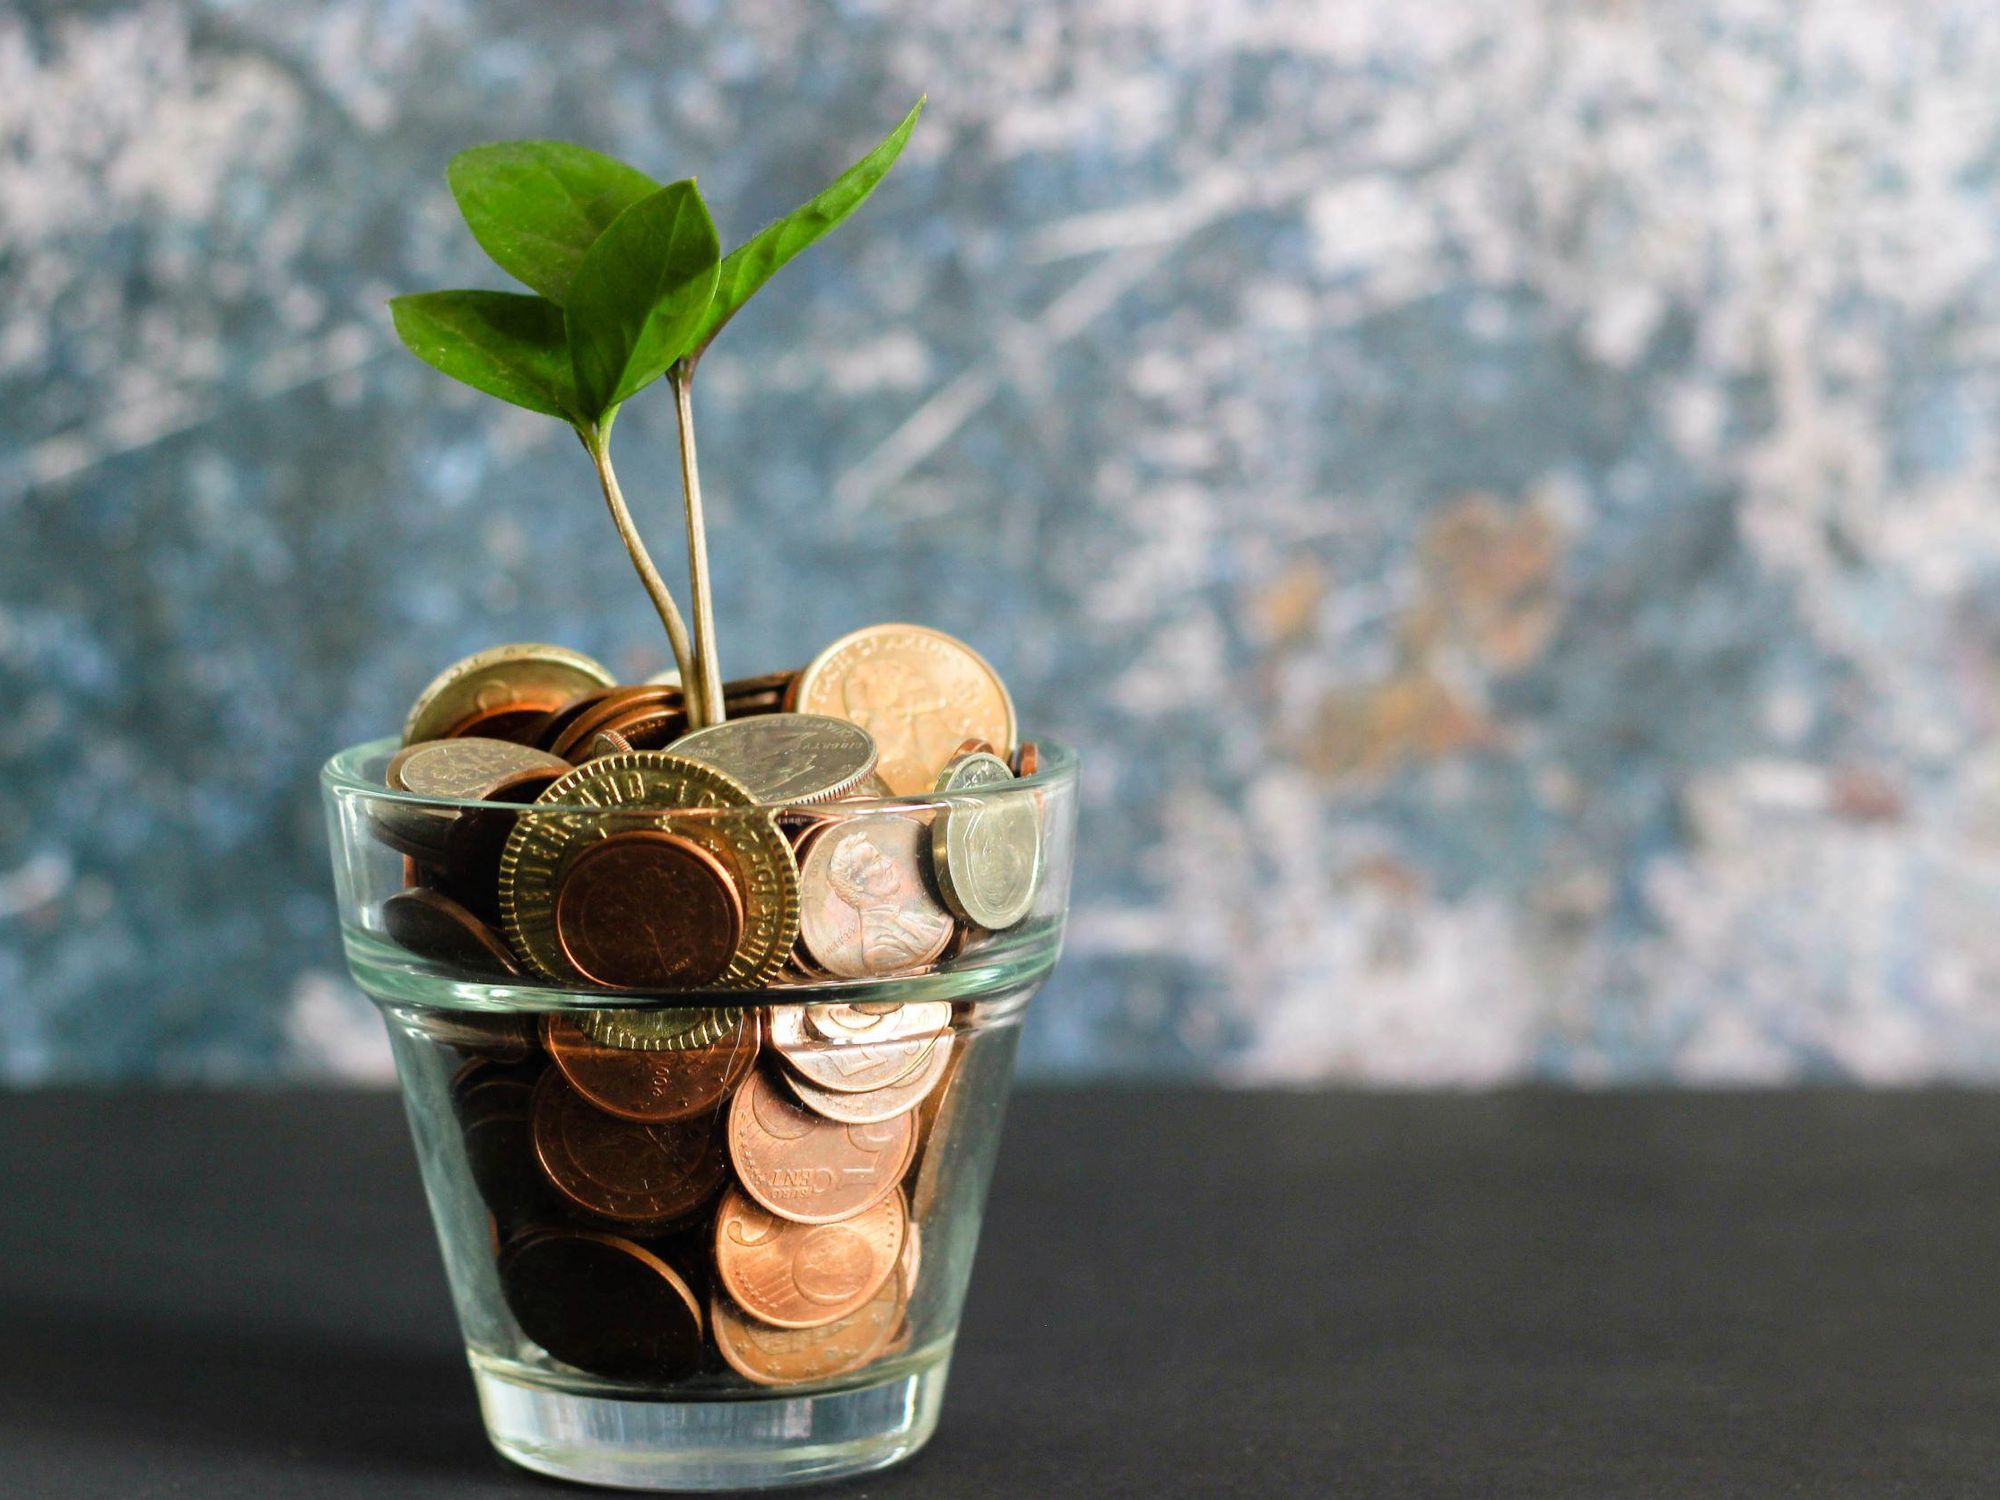 Plant in a glass pot filled with coins instead of dirt